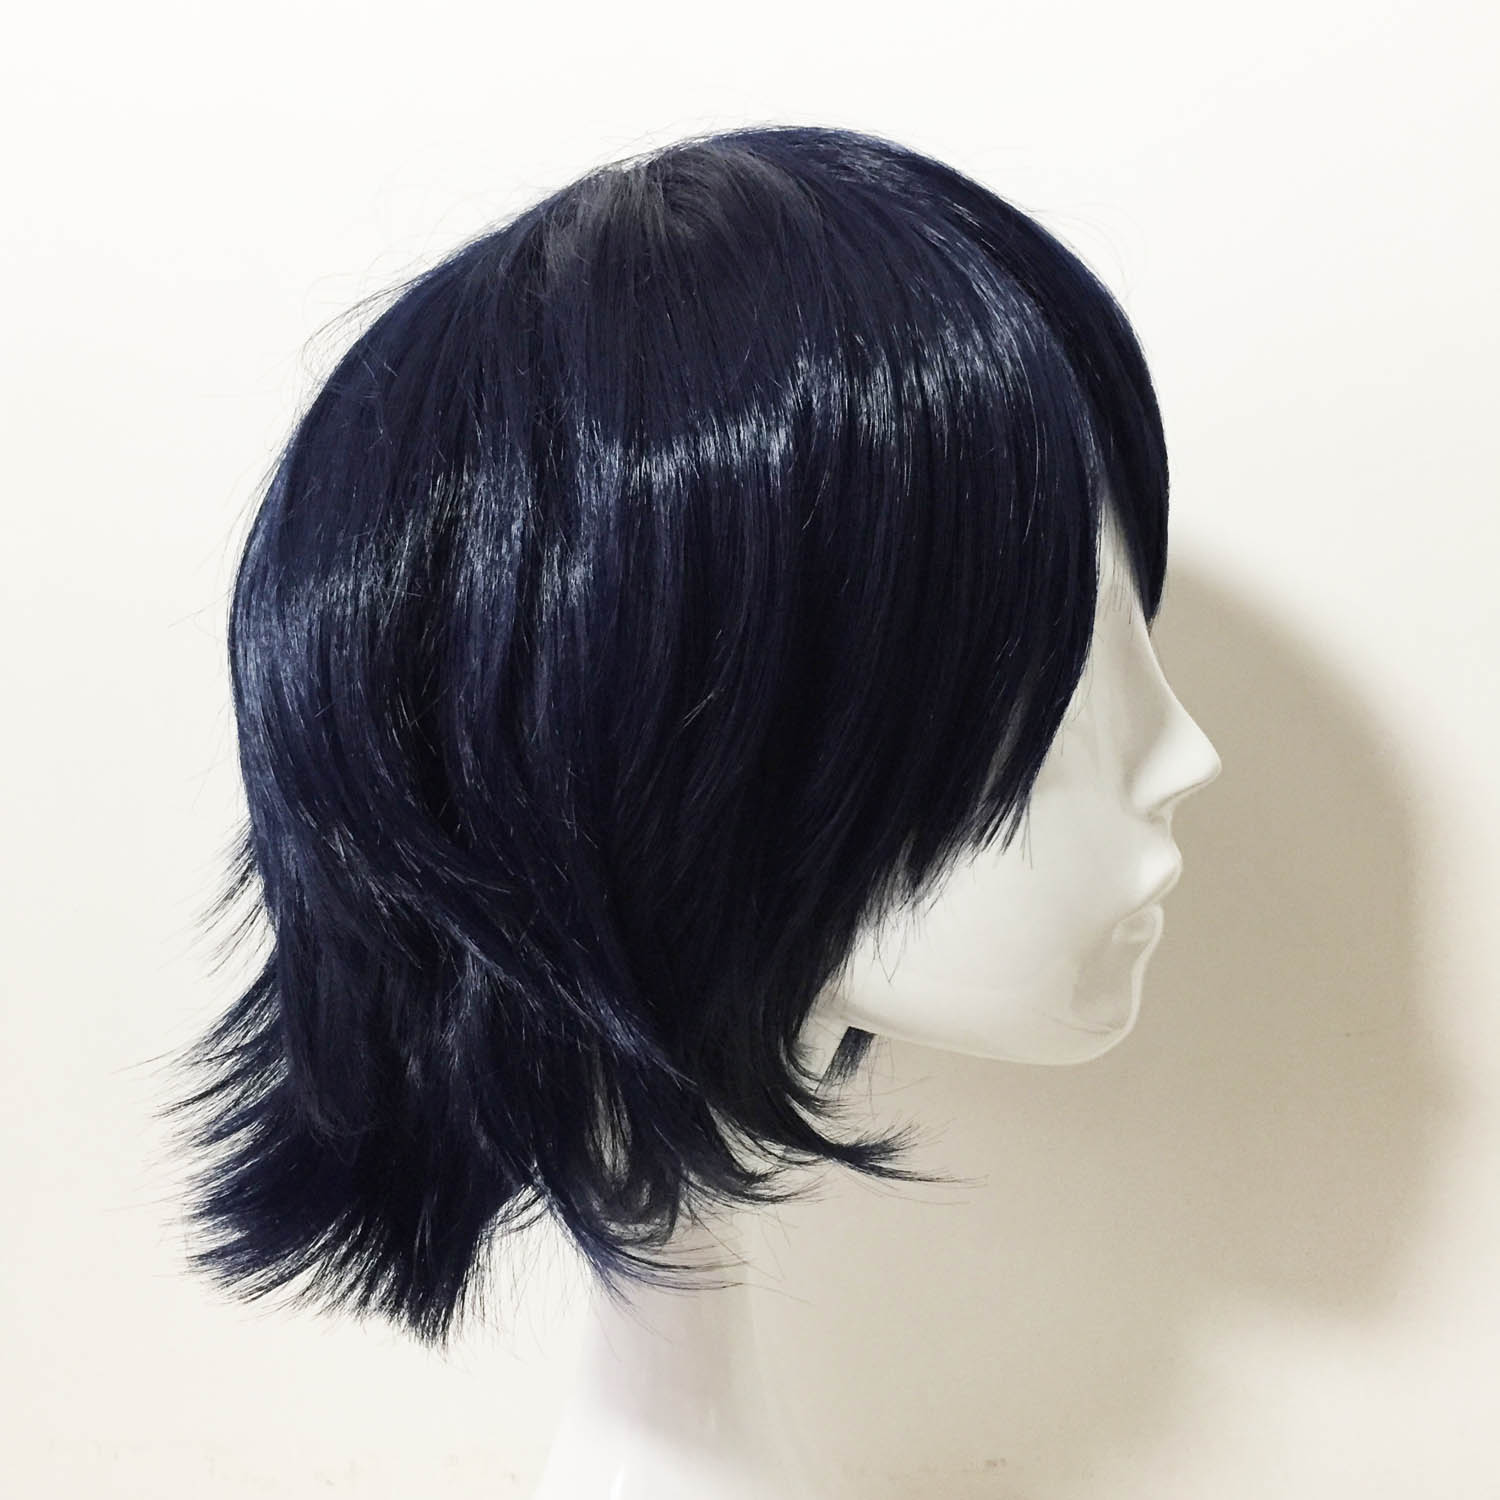 nevermindyrhead Men Navy Short Straight Fringe Bangs Flick Out Cosplay Wig